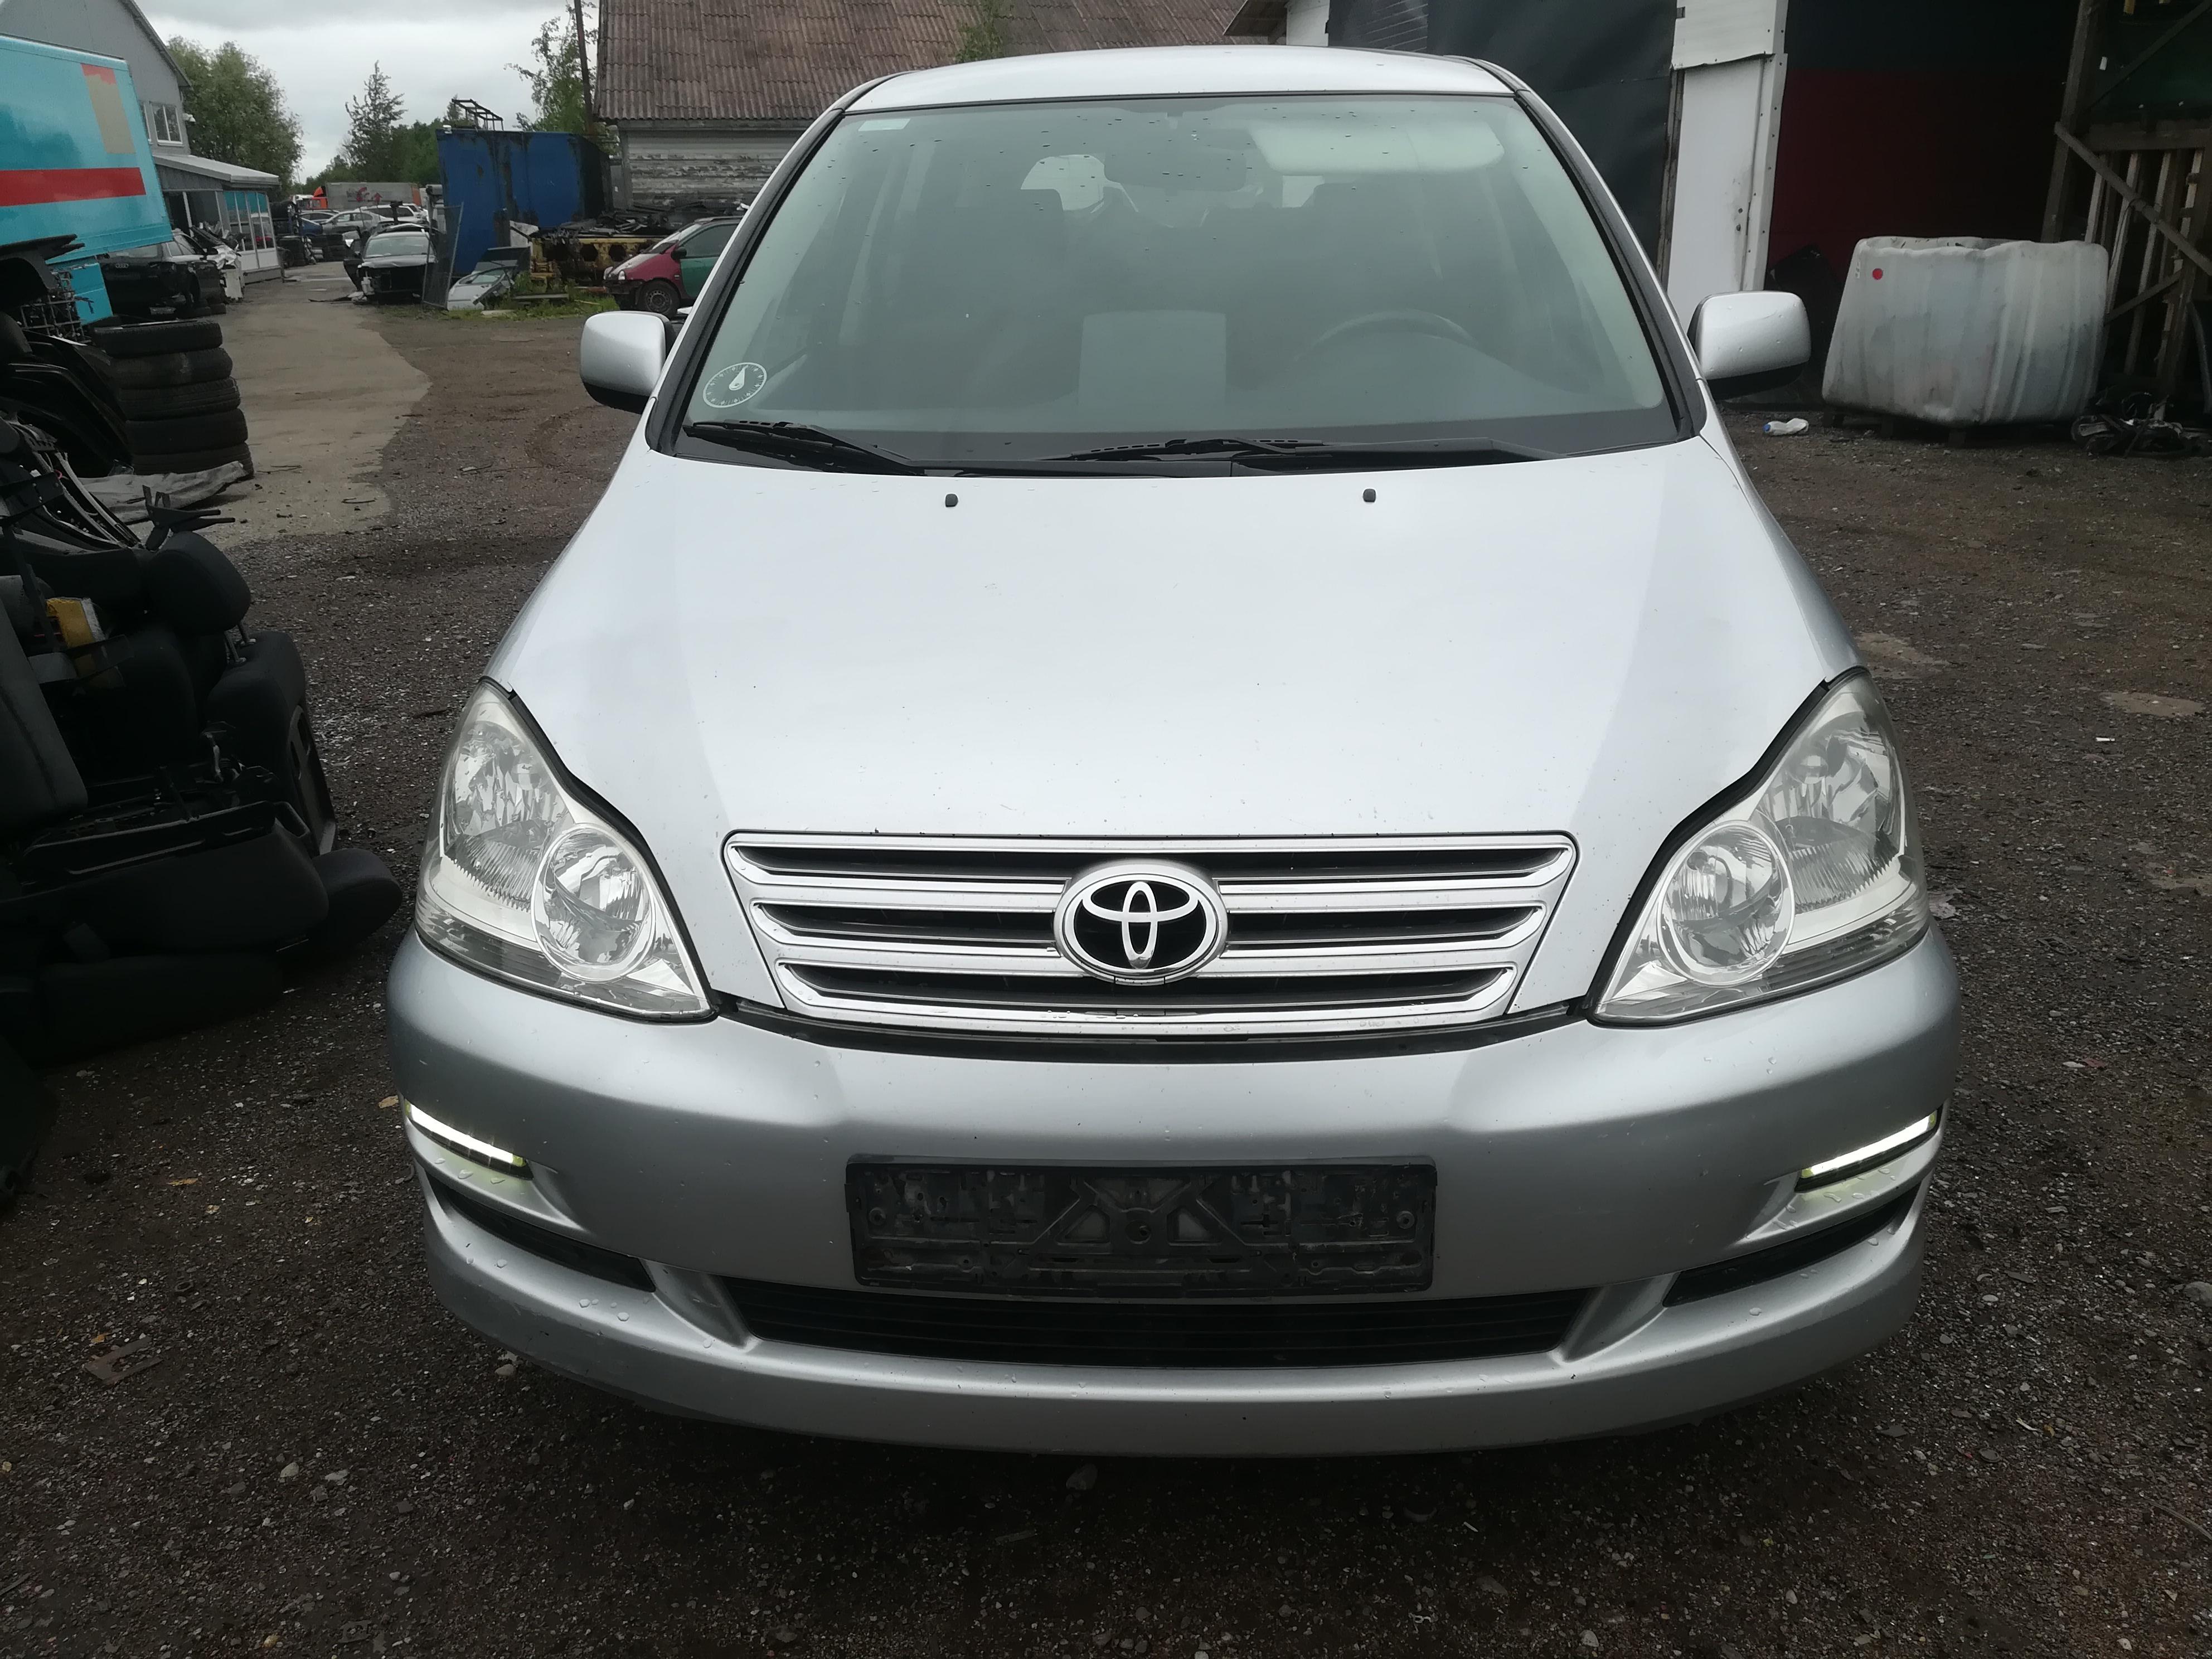 A4524 Toyota AVENSIS VERSO 2005 2.0 Mechanical Diesel